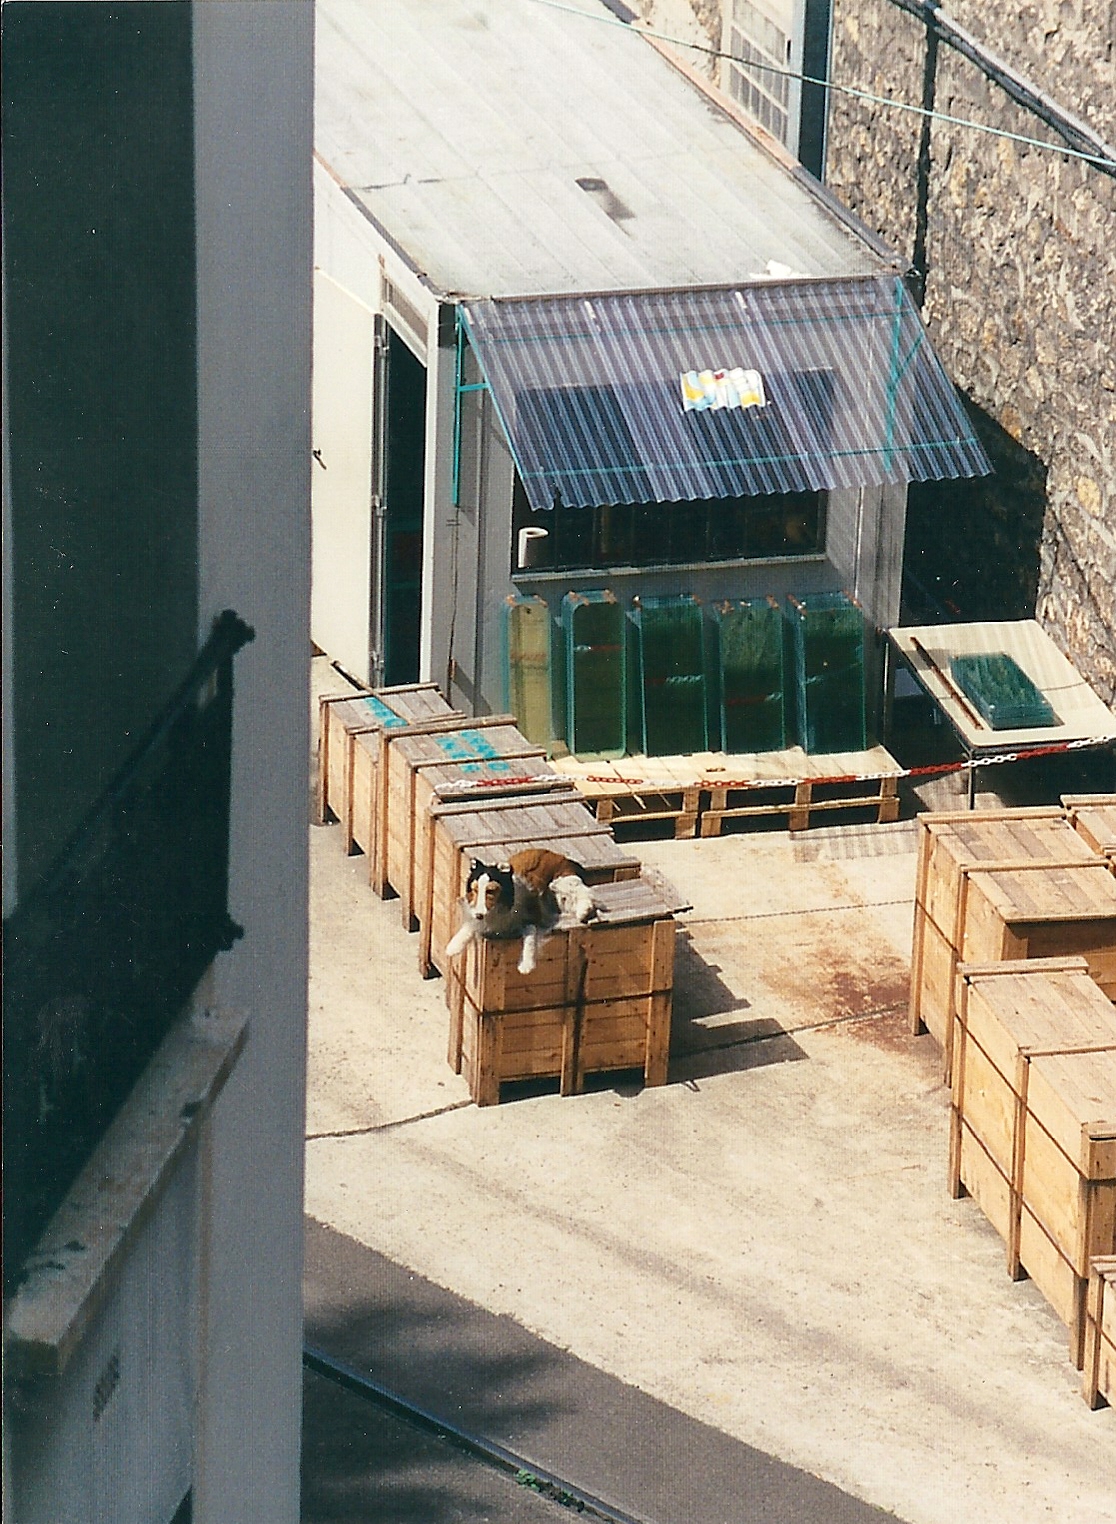     Crates still need to be guarded in August. 
Photo ©2003  Ann James Massey